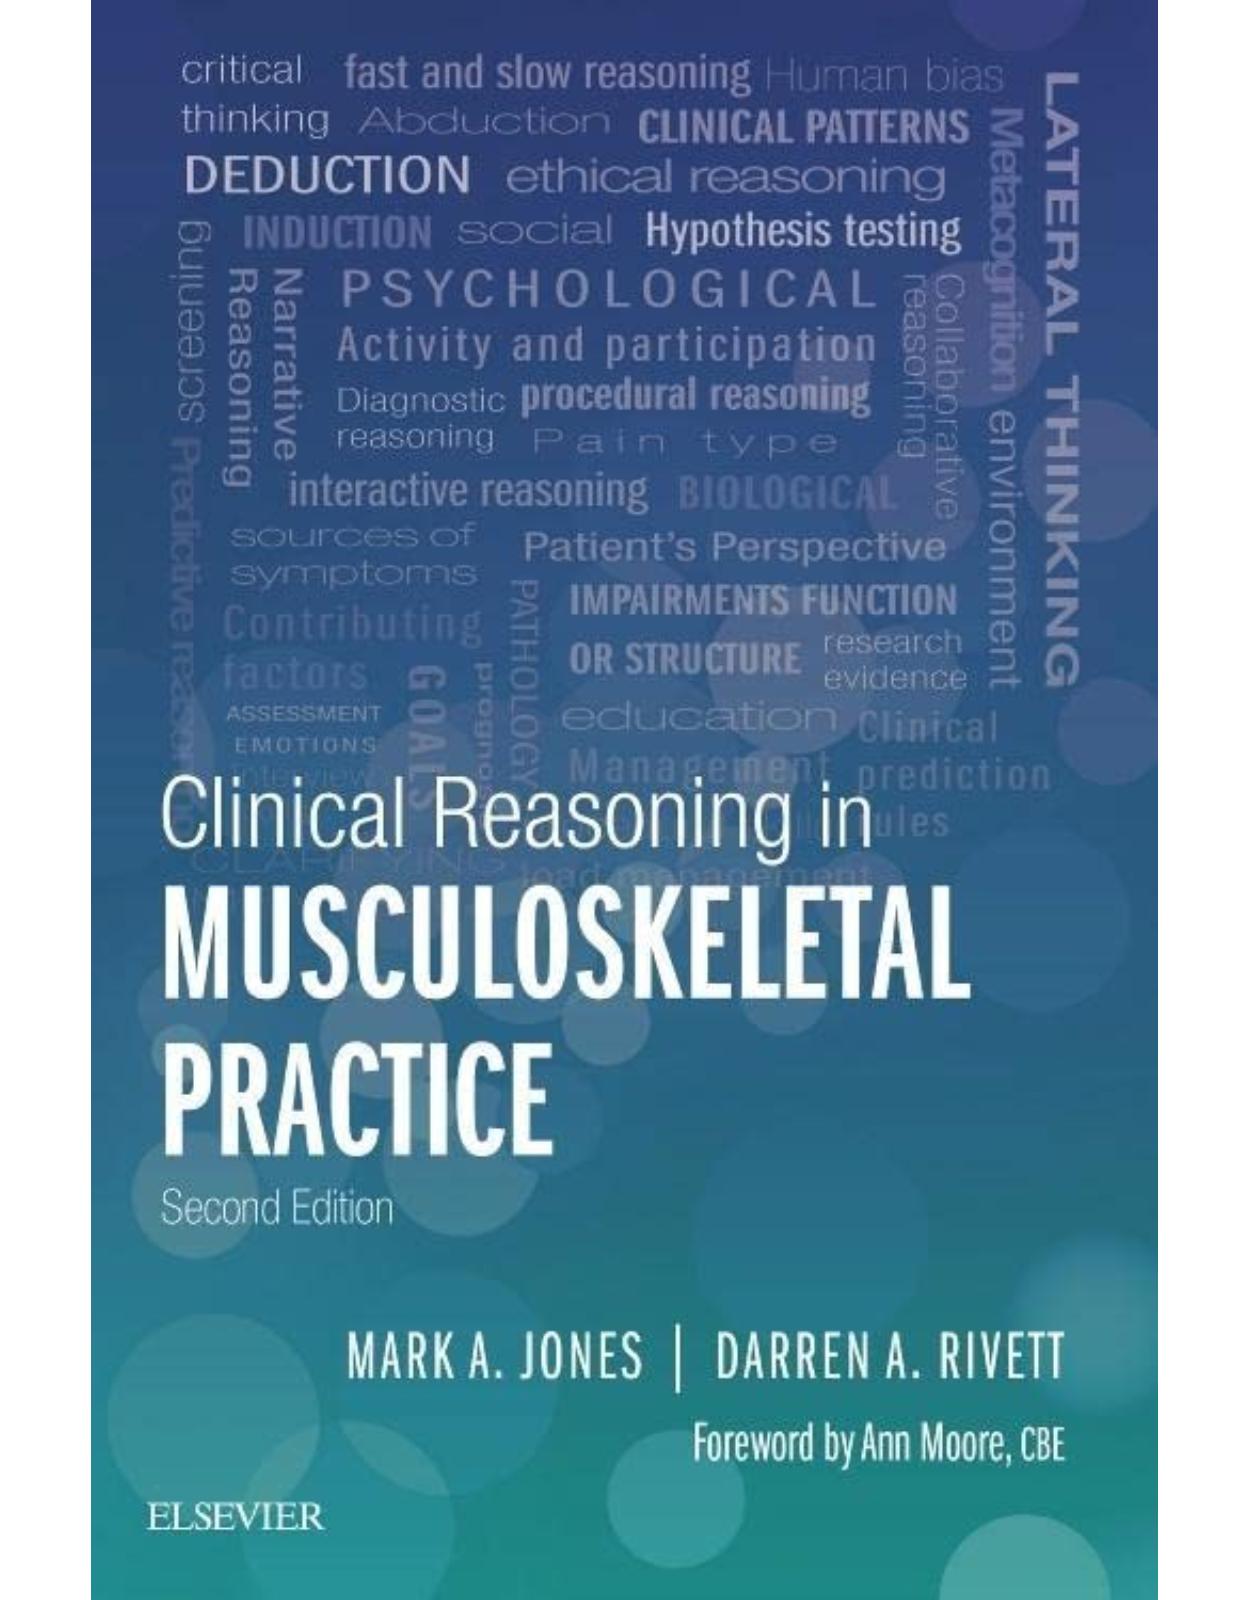 Clinical Reasoning in Musculoskeletal Practice, 2e